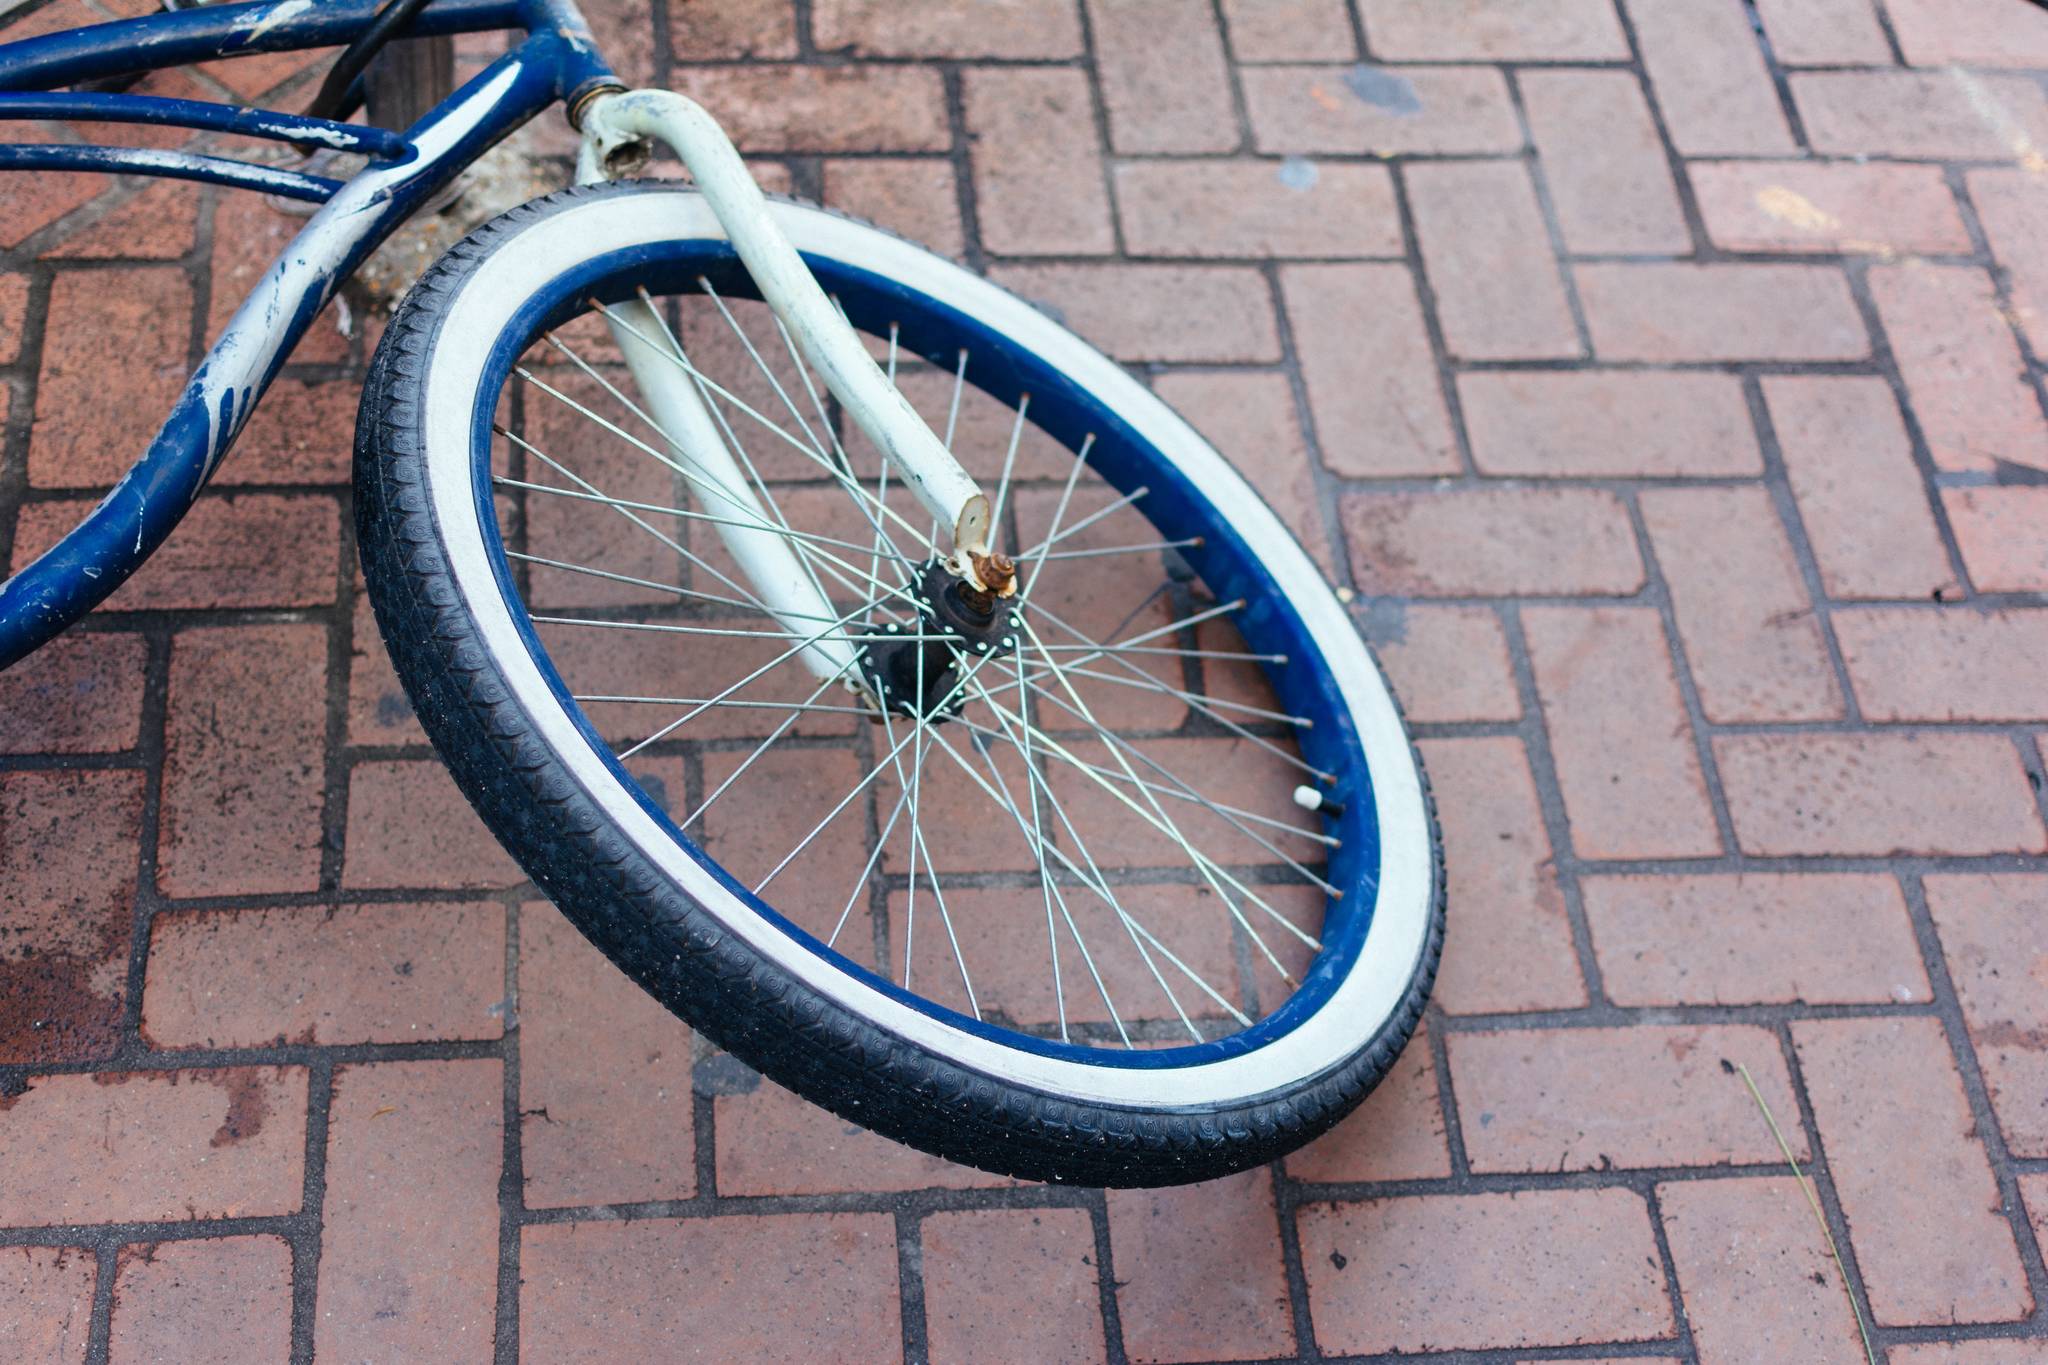 Police investigating hit-and-run on bicyclist